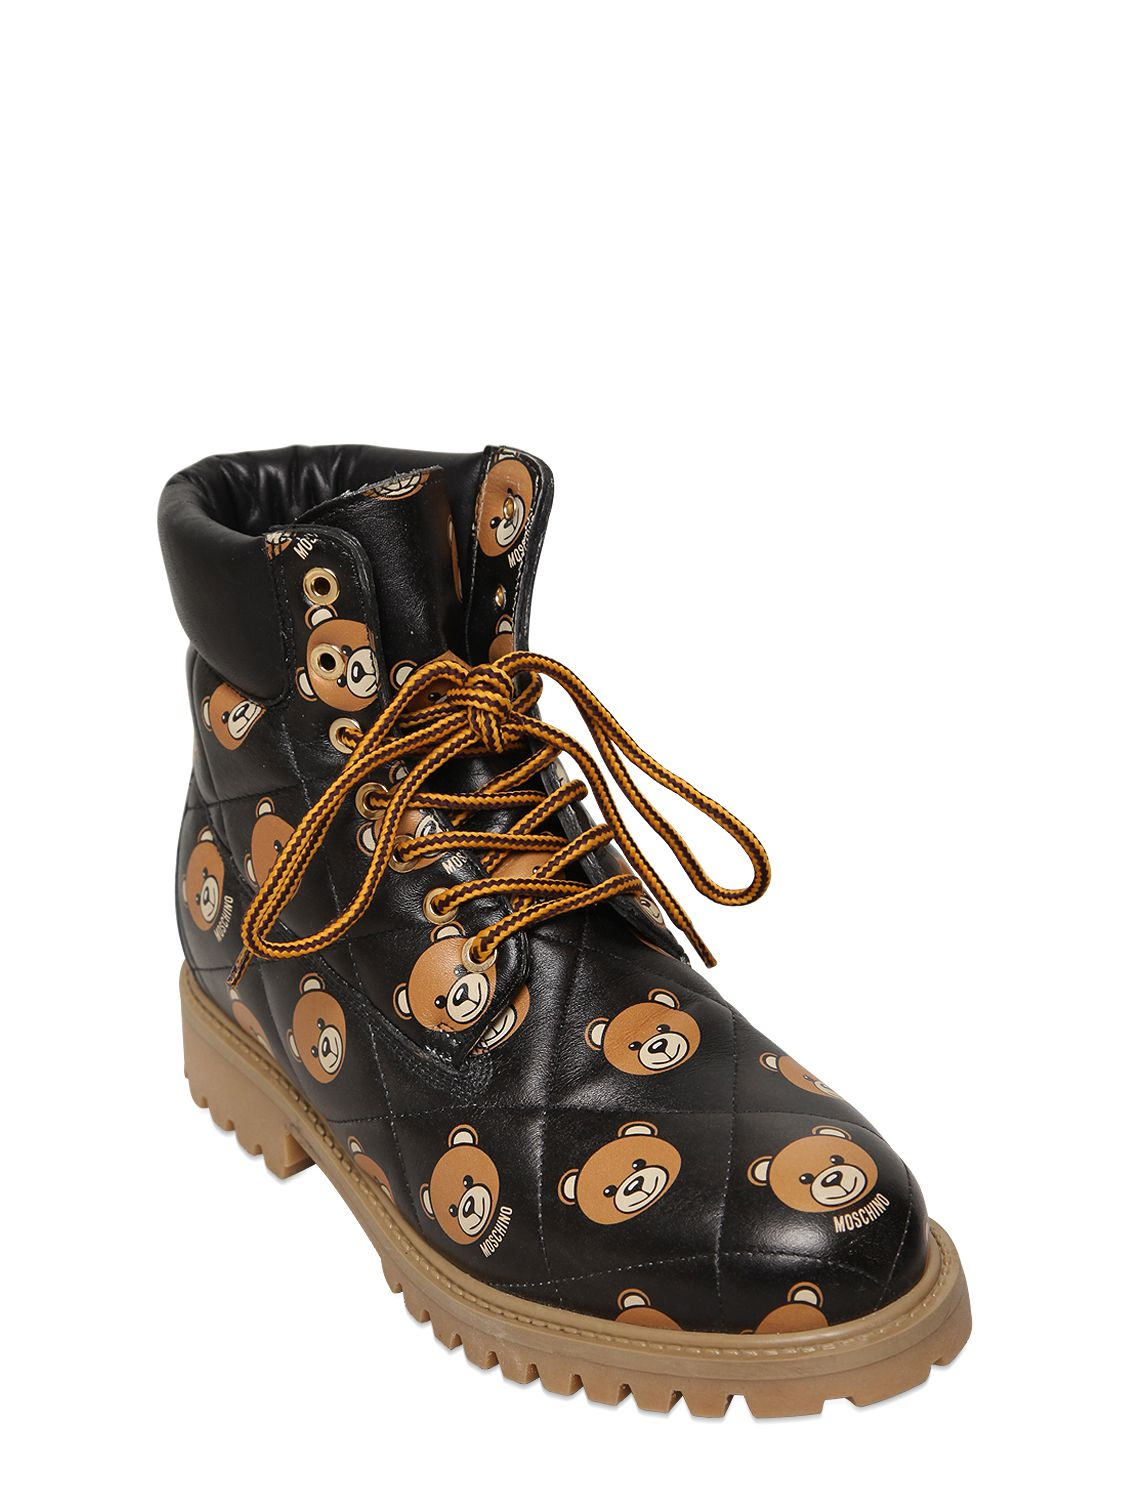 Moschino Bear-Print Leather Combat Boots in Black | Lyst